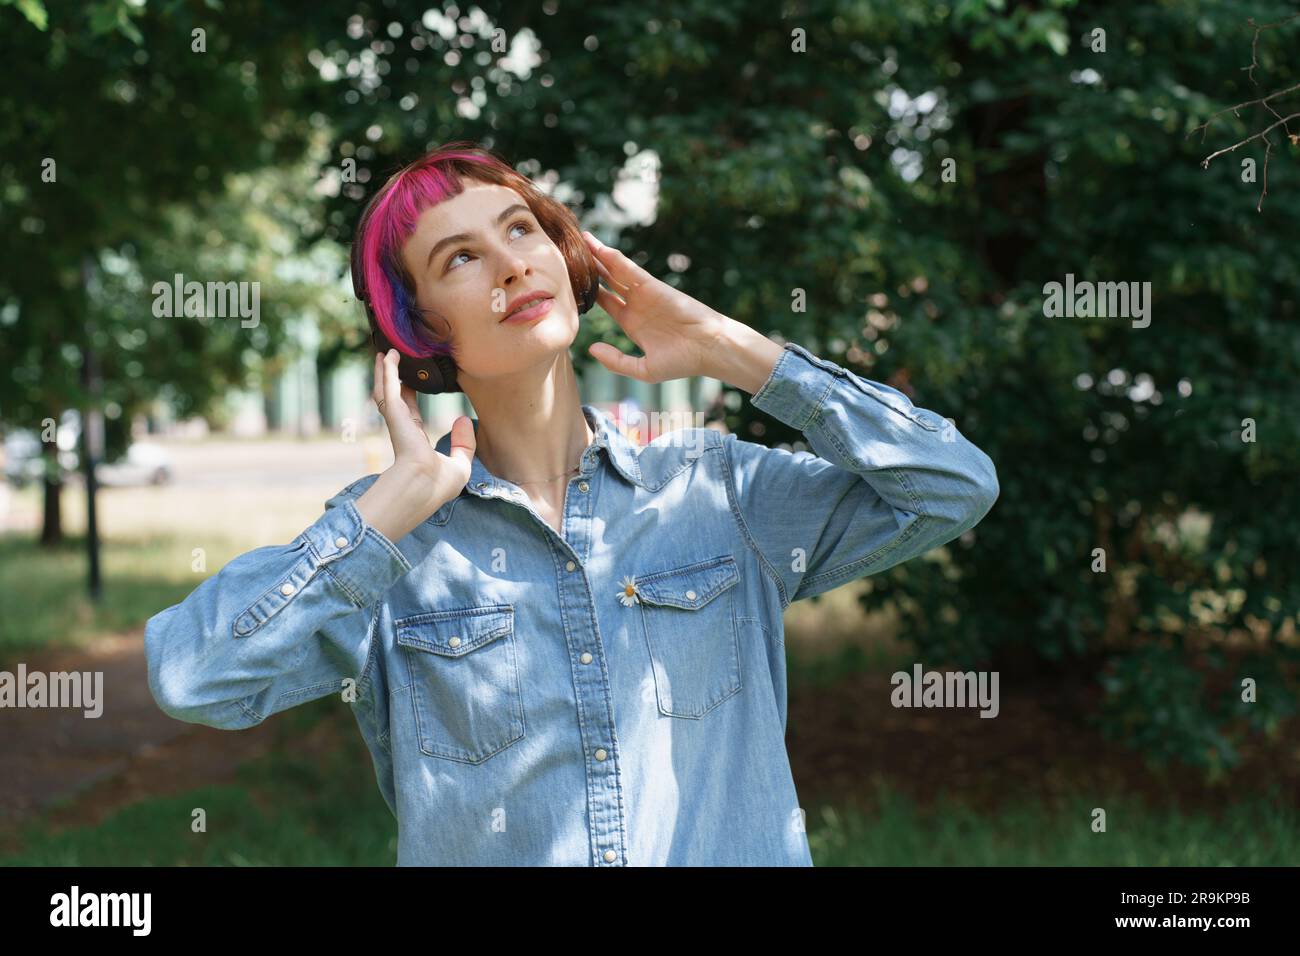 Woman with pink hair with headphones listens to music in the park Stock Photo